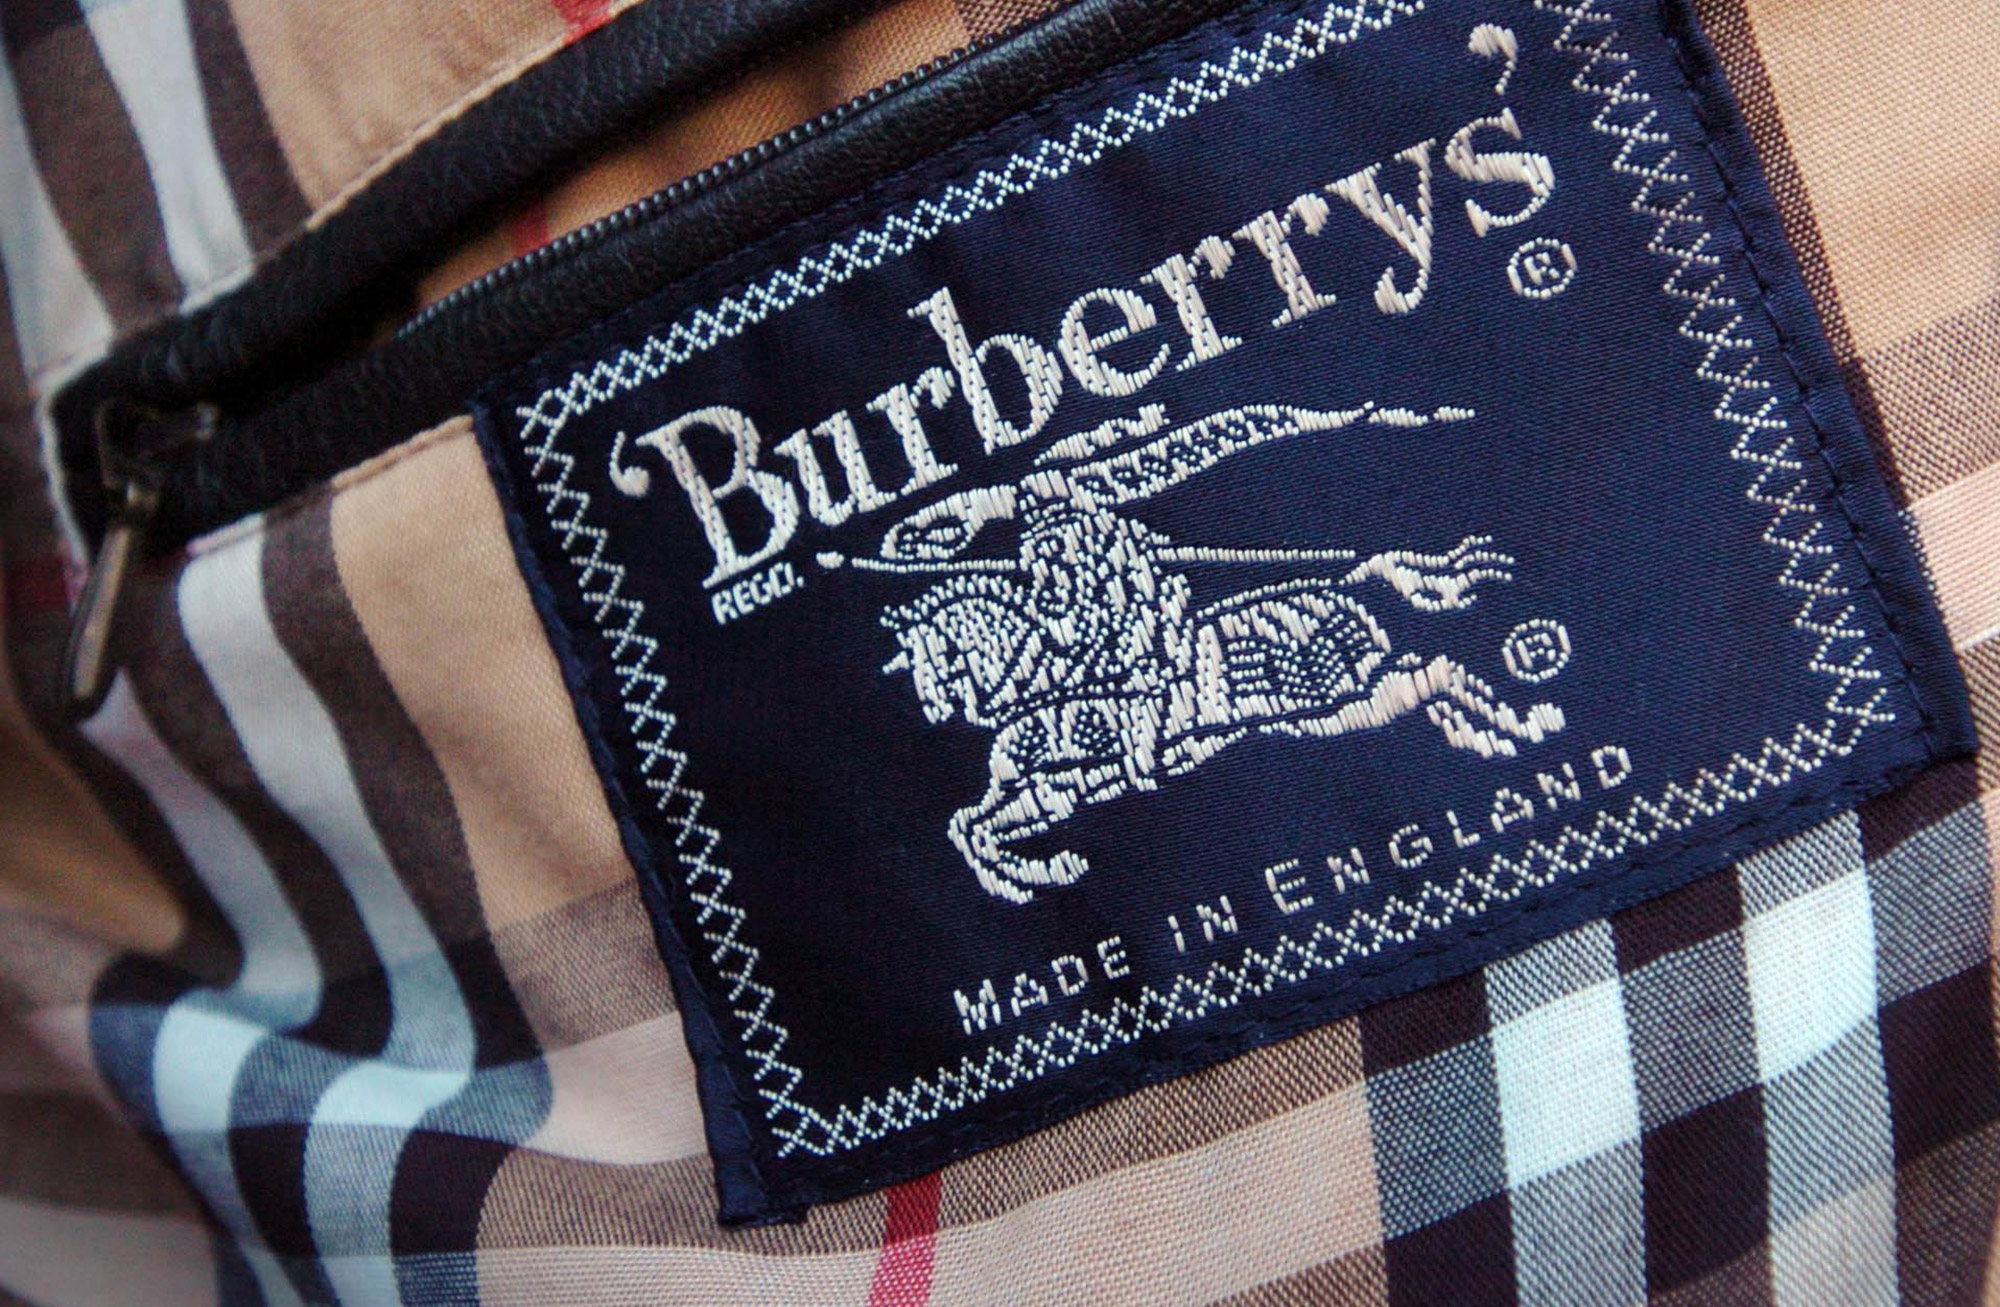 Sell Old Burberry and Brand Might Invite for Tea - Bloomberg